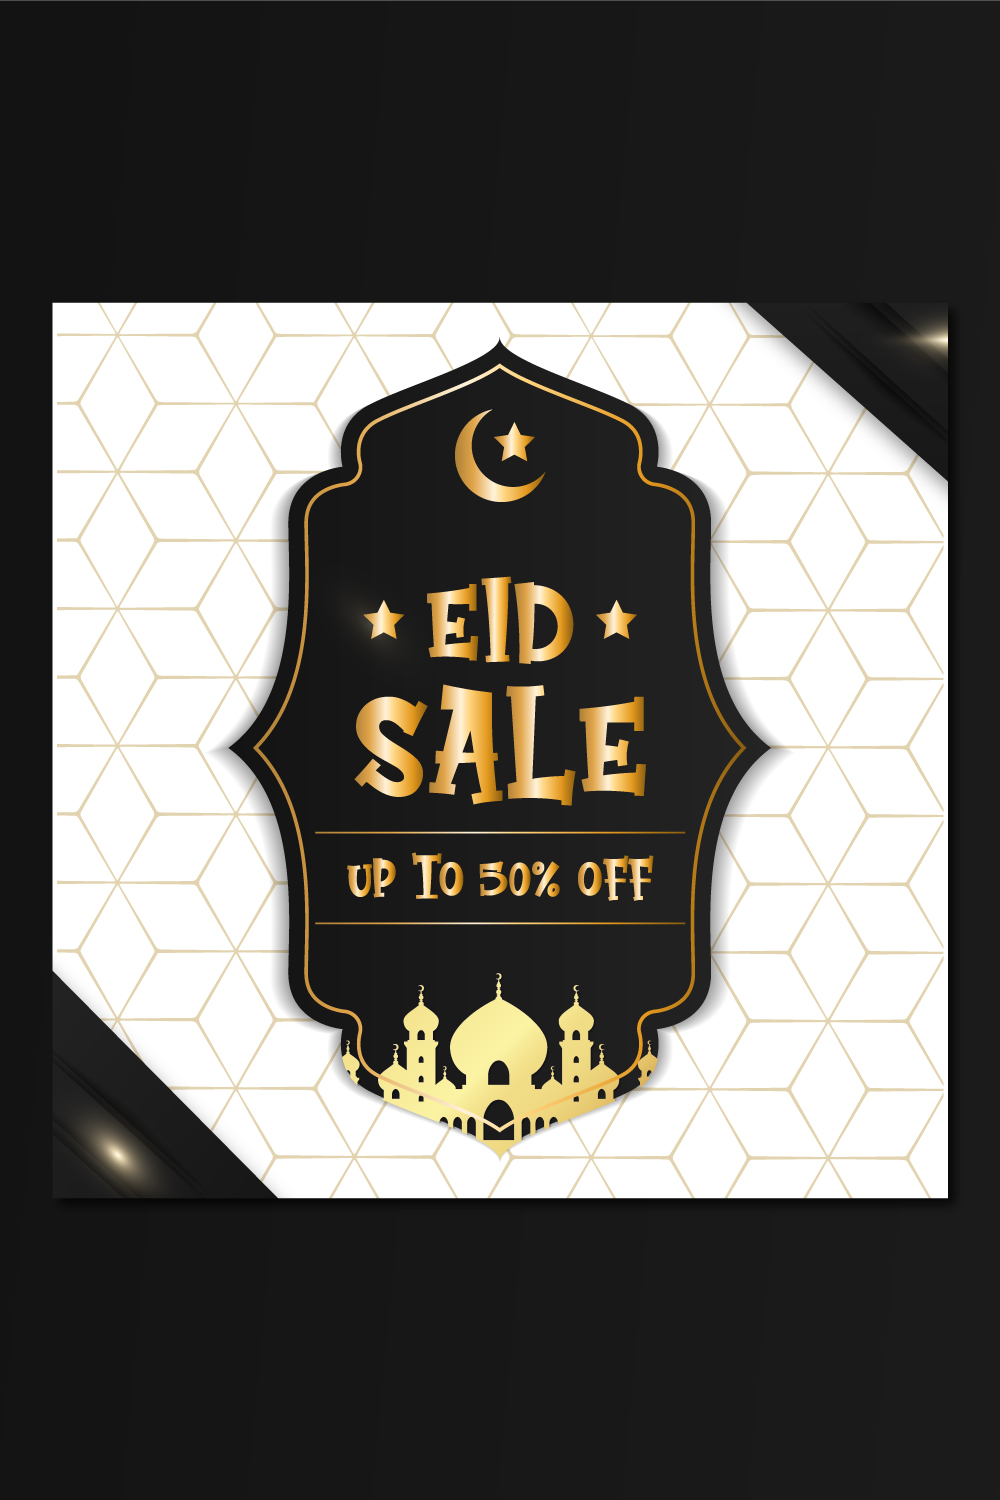 Eid mubarak creative sale and discount banner or tag design pinterest preview image.